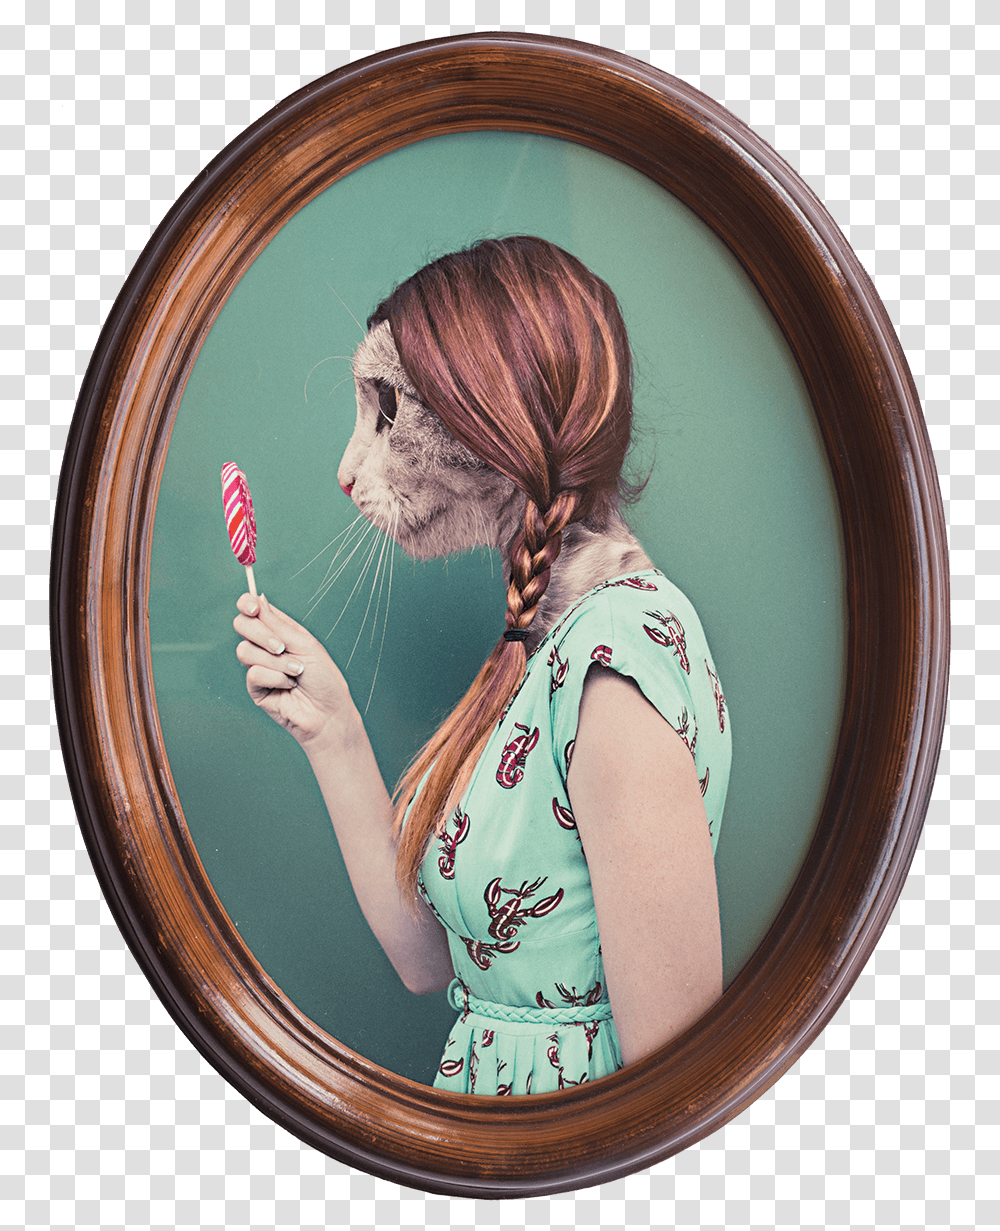 Kaipot In Wooden Oval Frame Wooden Oval Frame, Person, Human, Food, Hair Transparent Png